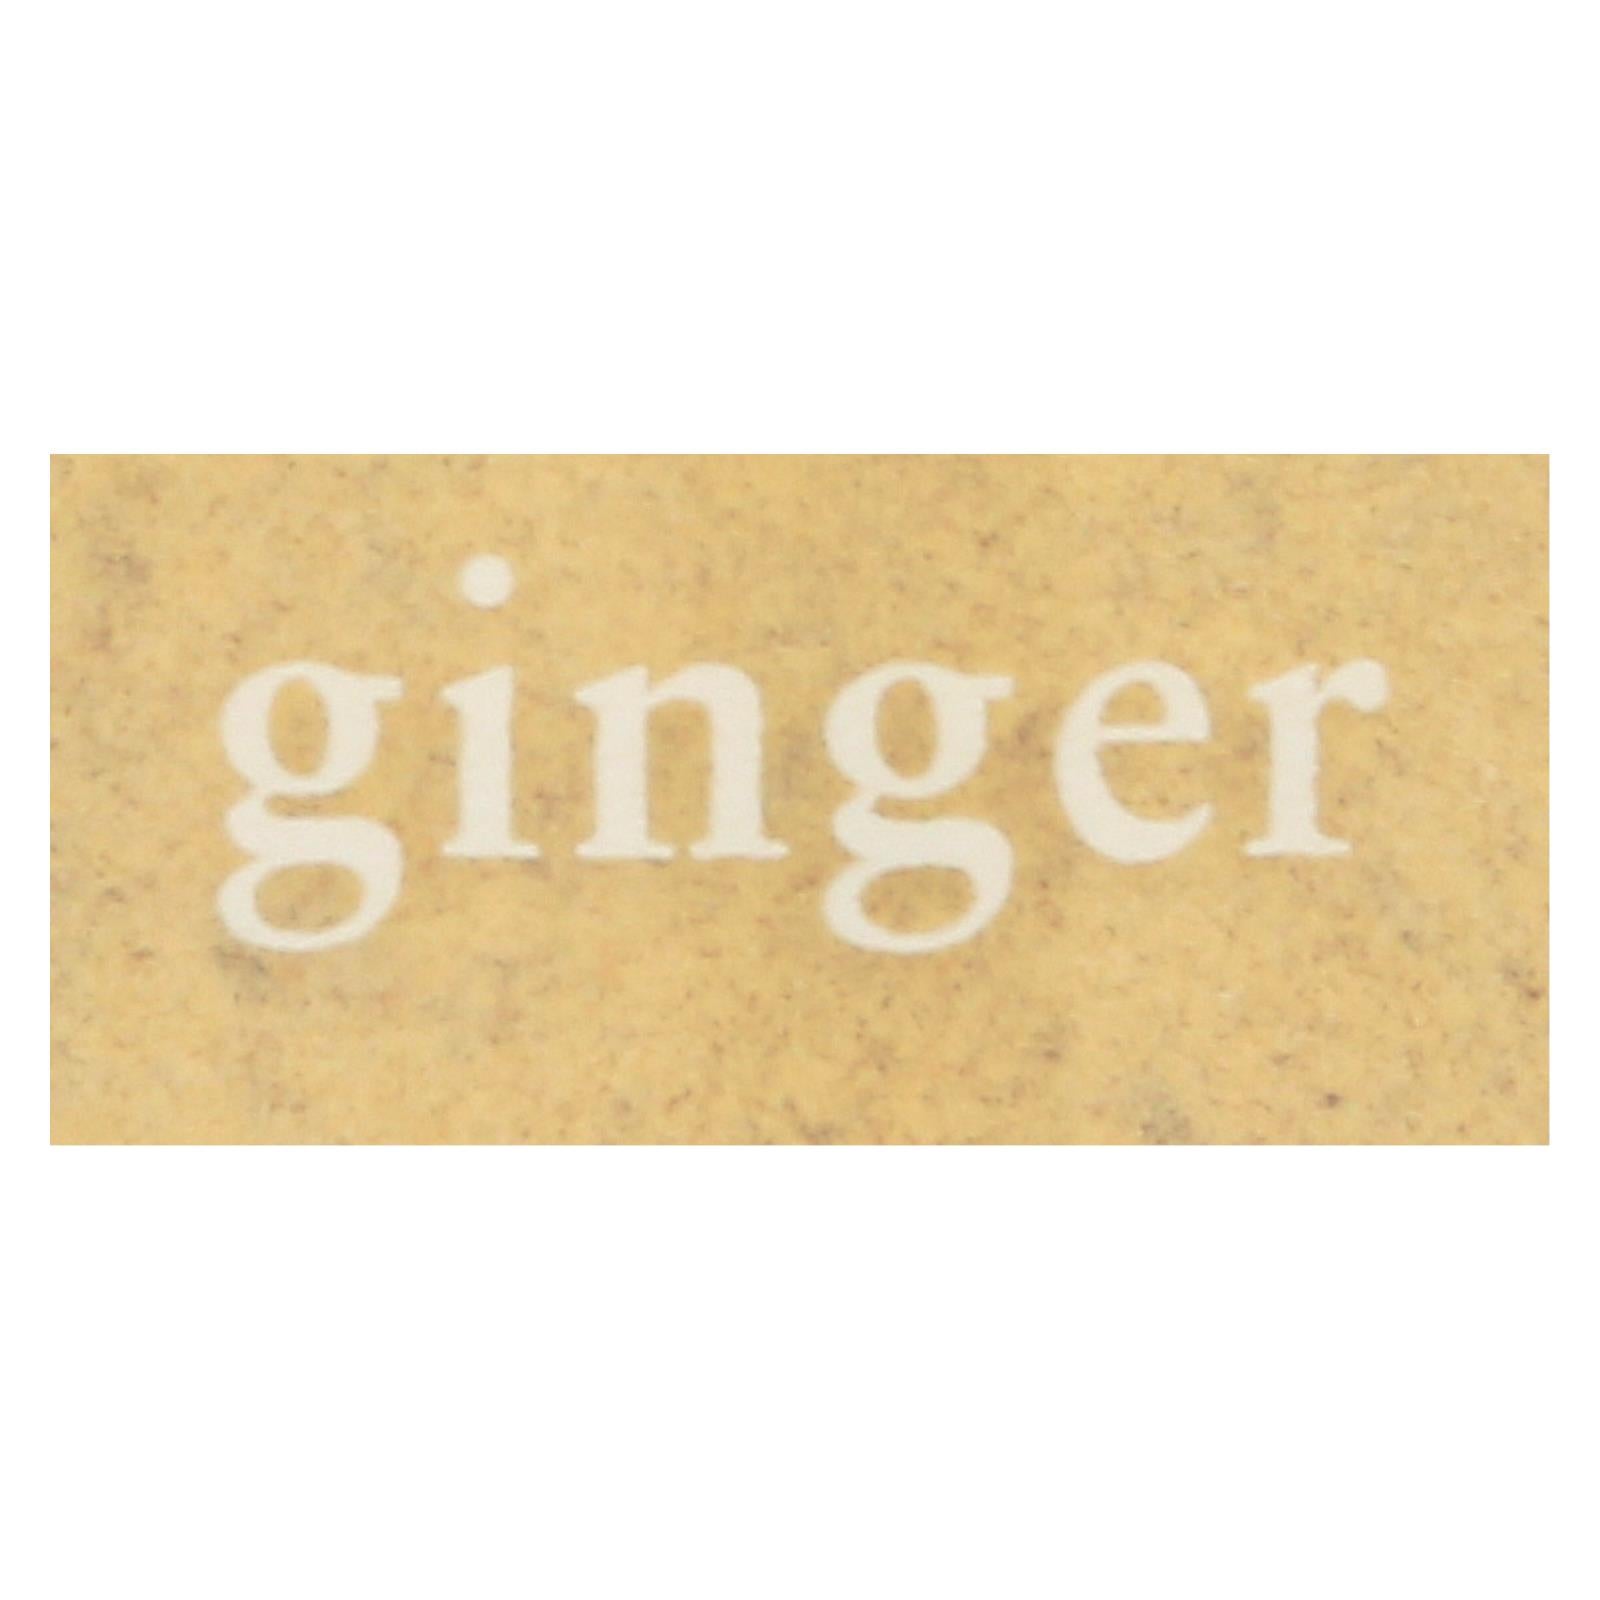 Simply Organic Ginger Root - Organic - Ground - .42 Oz - Case Of 6